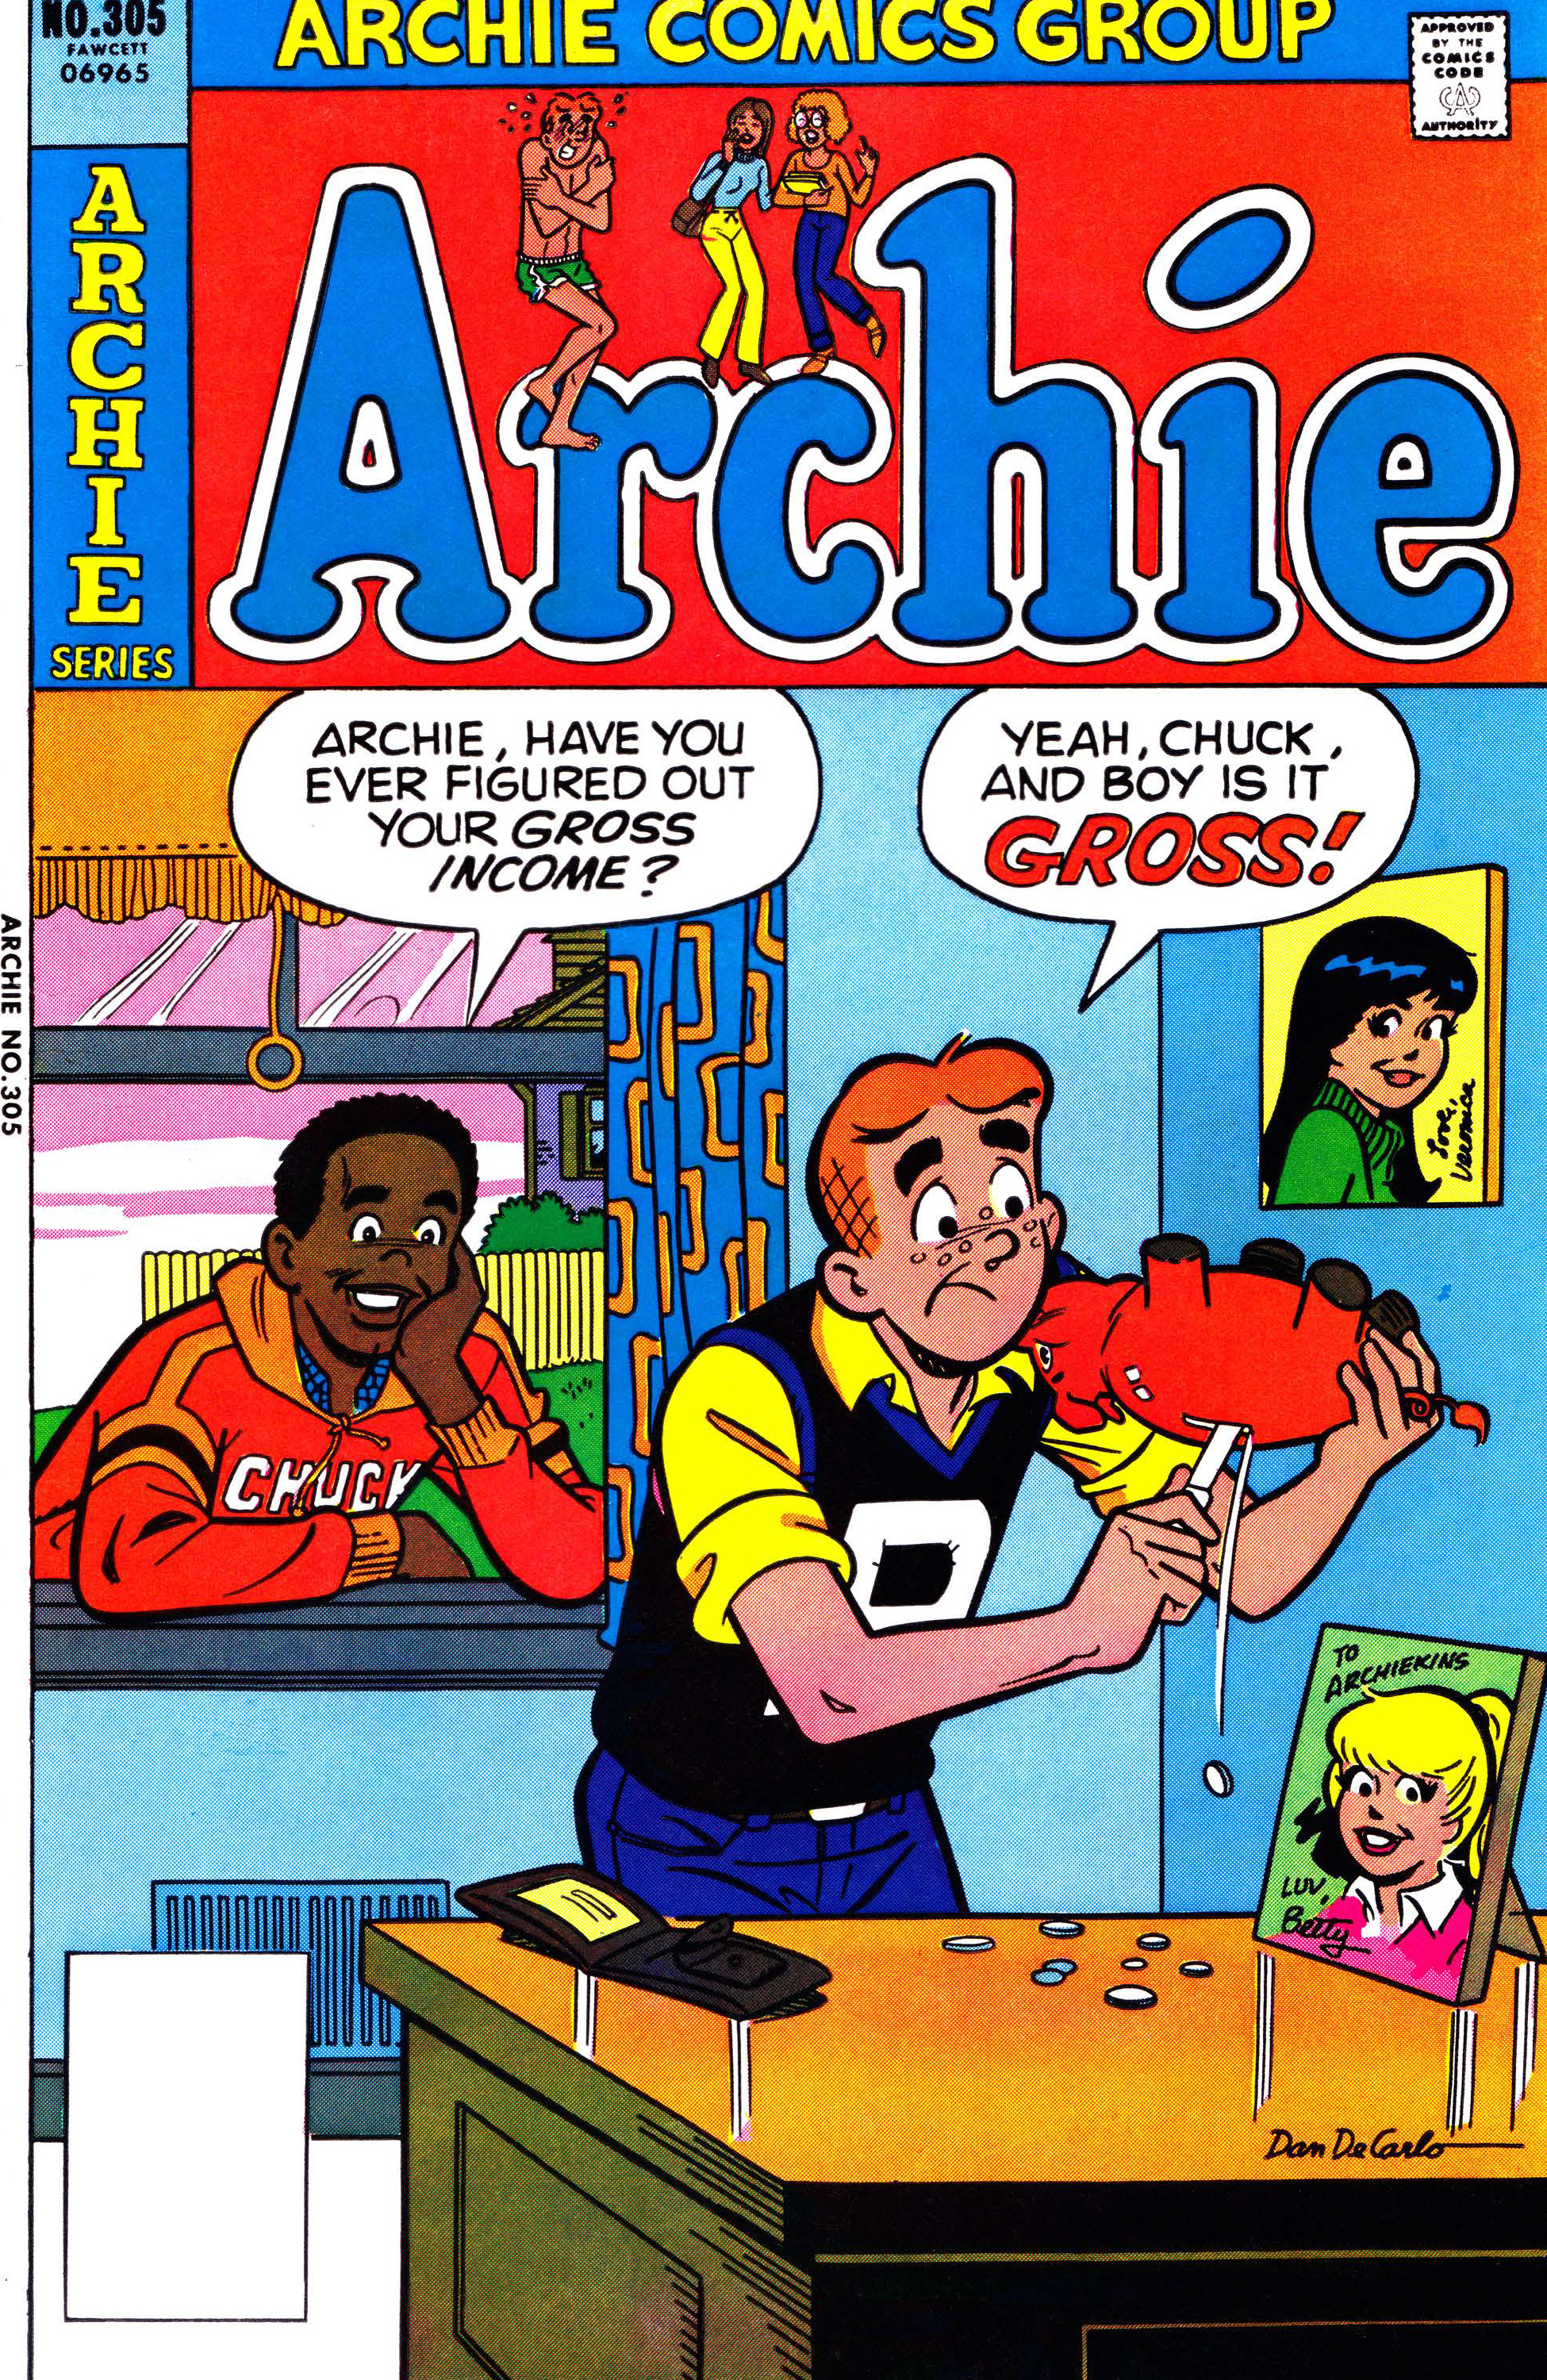 Read online Archie (1960) comic -  Issue #305 - 1